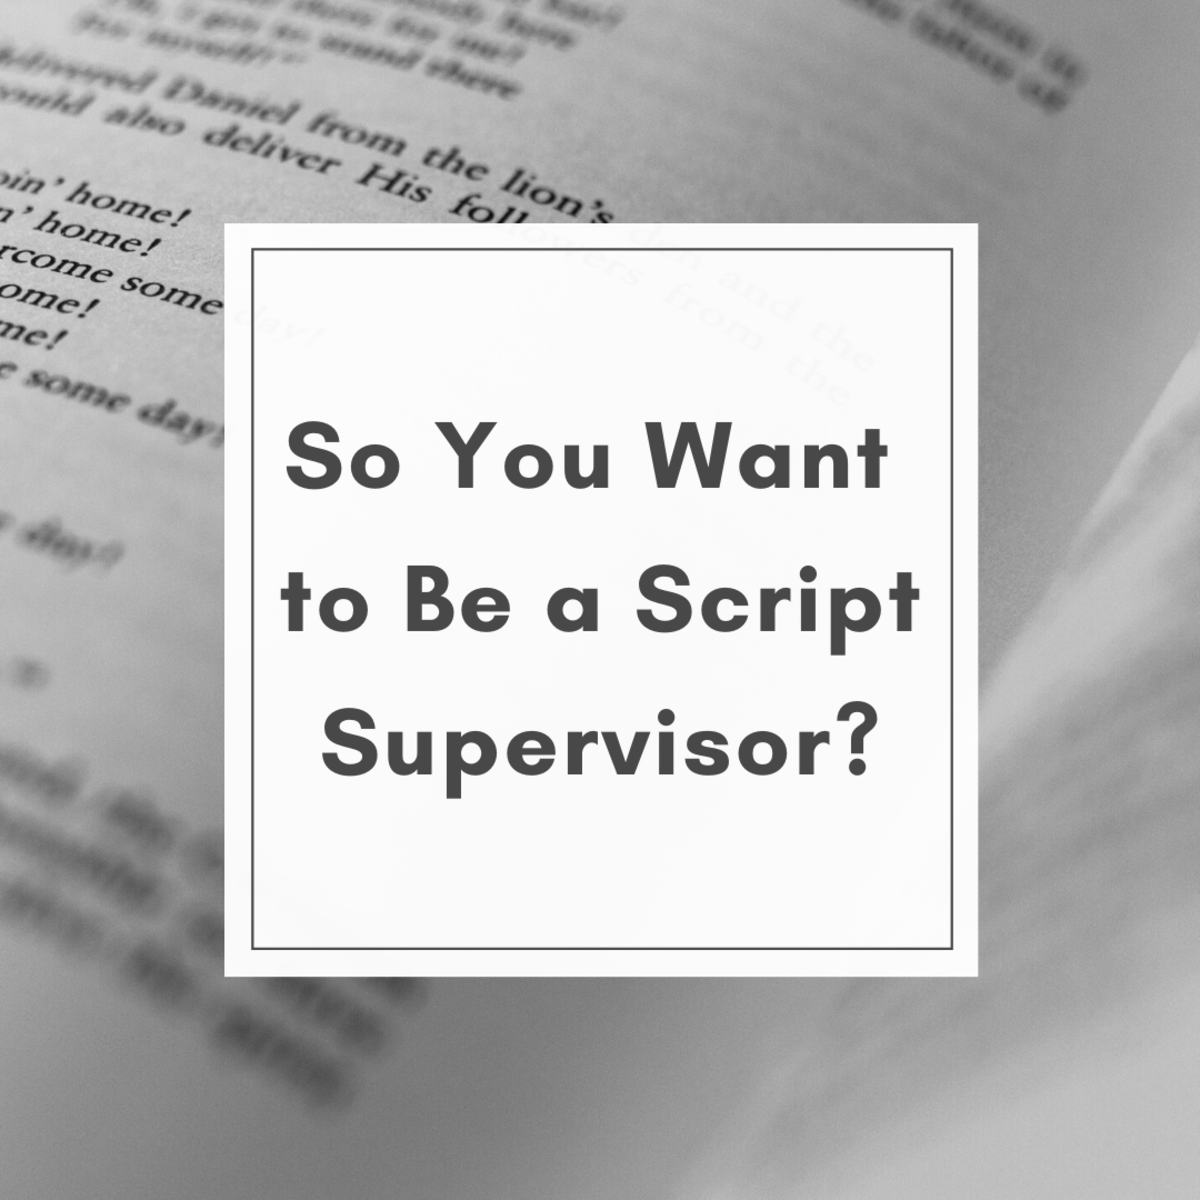 So You Want to Be a Script Supervisor?